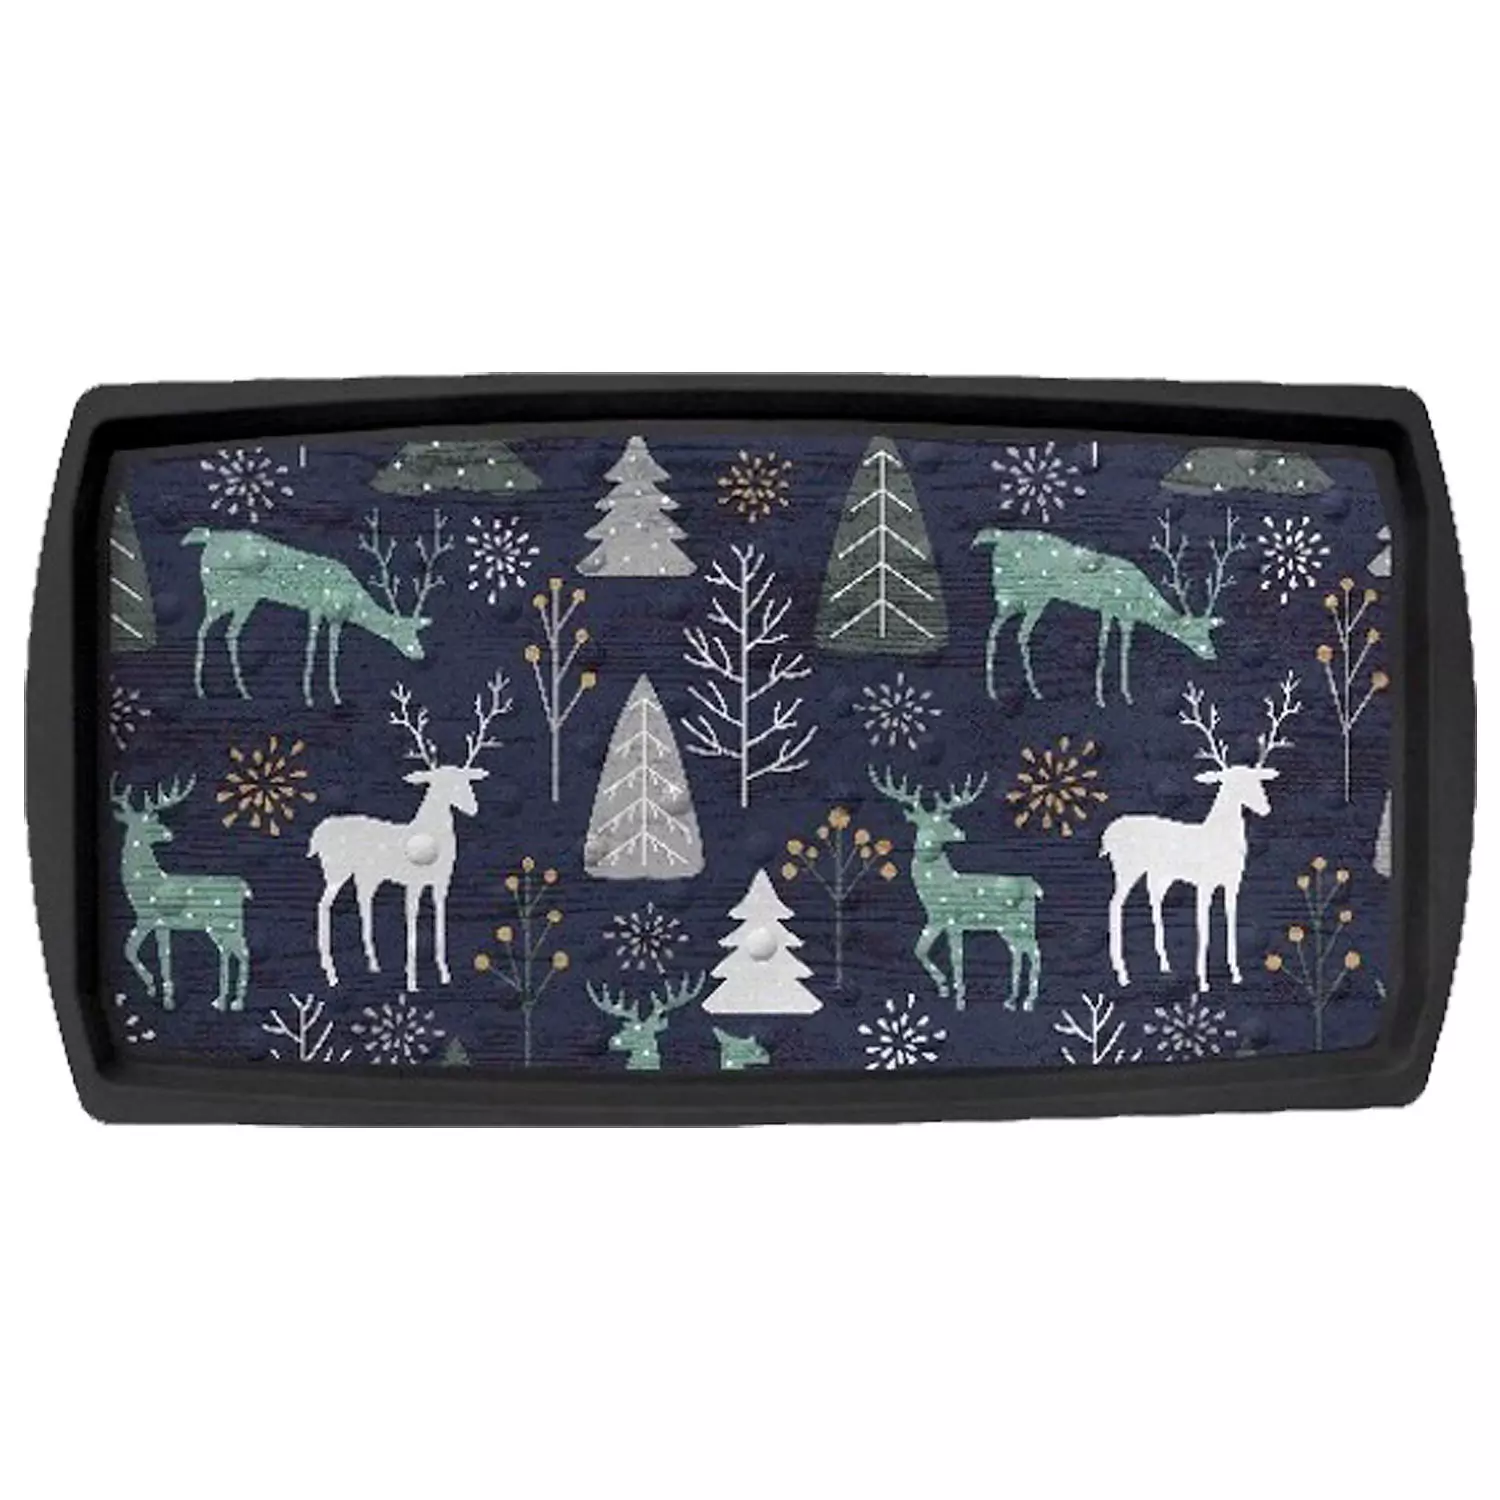 Boot tray, 16"x32" , blue reindeer pattern